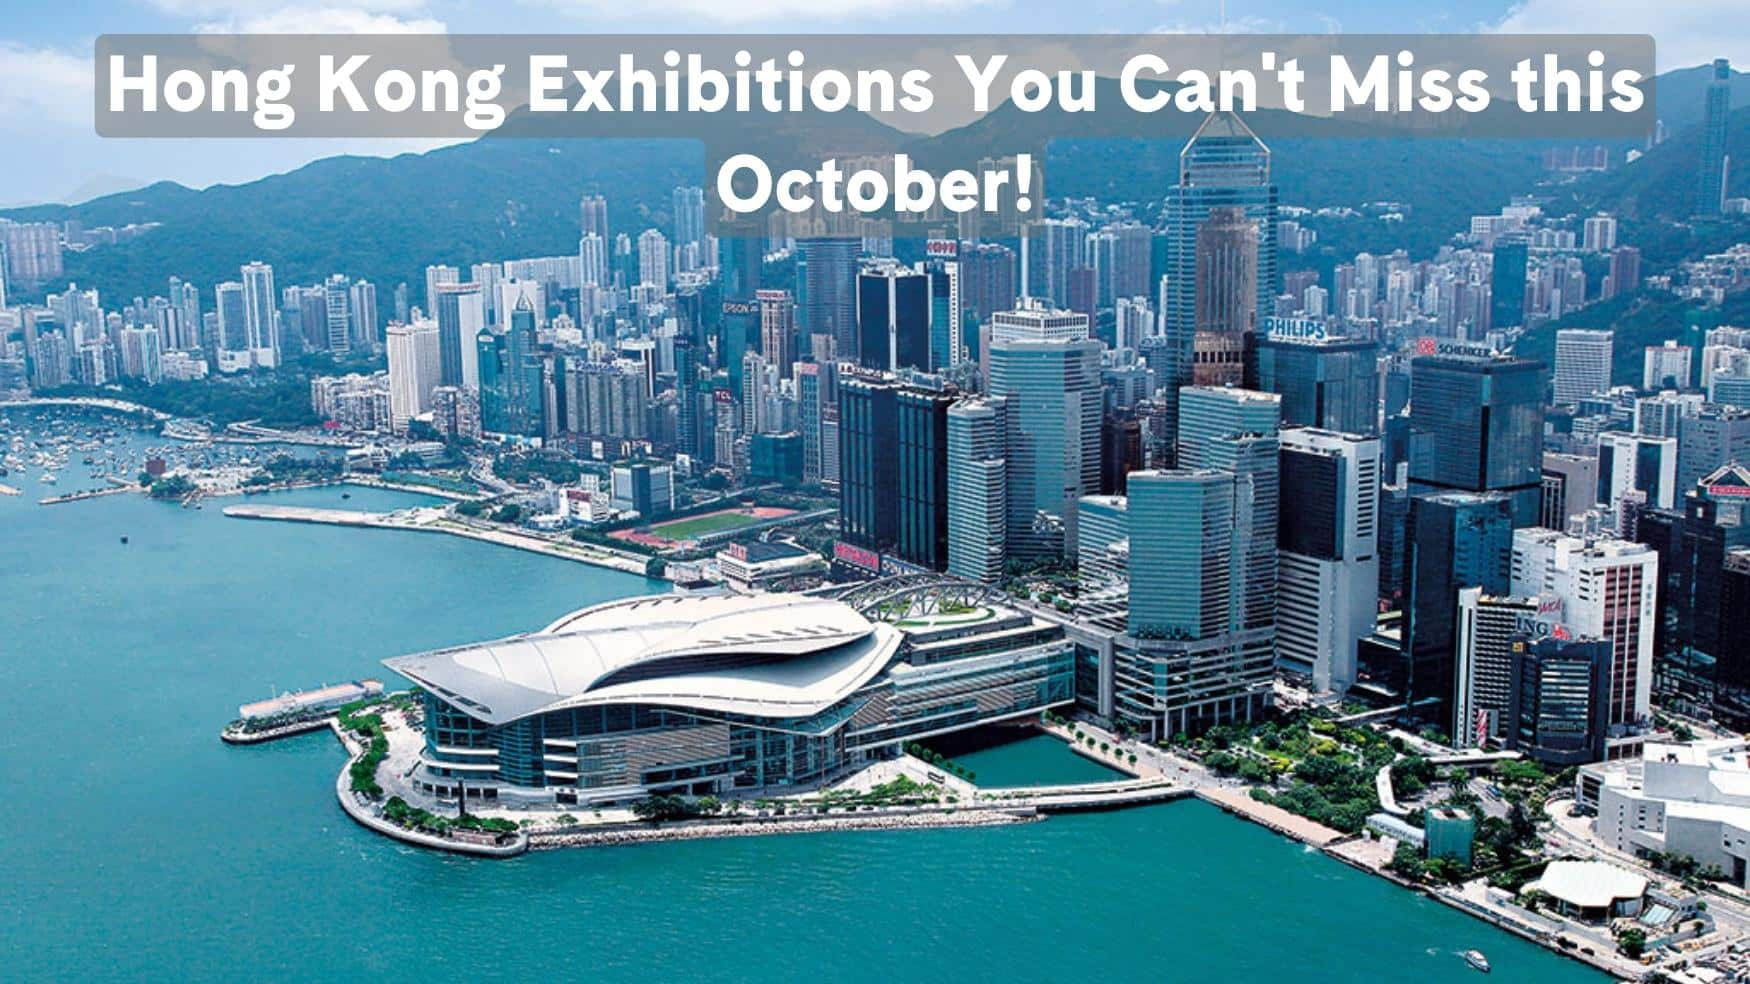 Hong Kong Exhibitions You Can't Miss this October